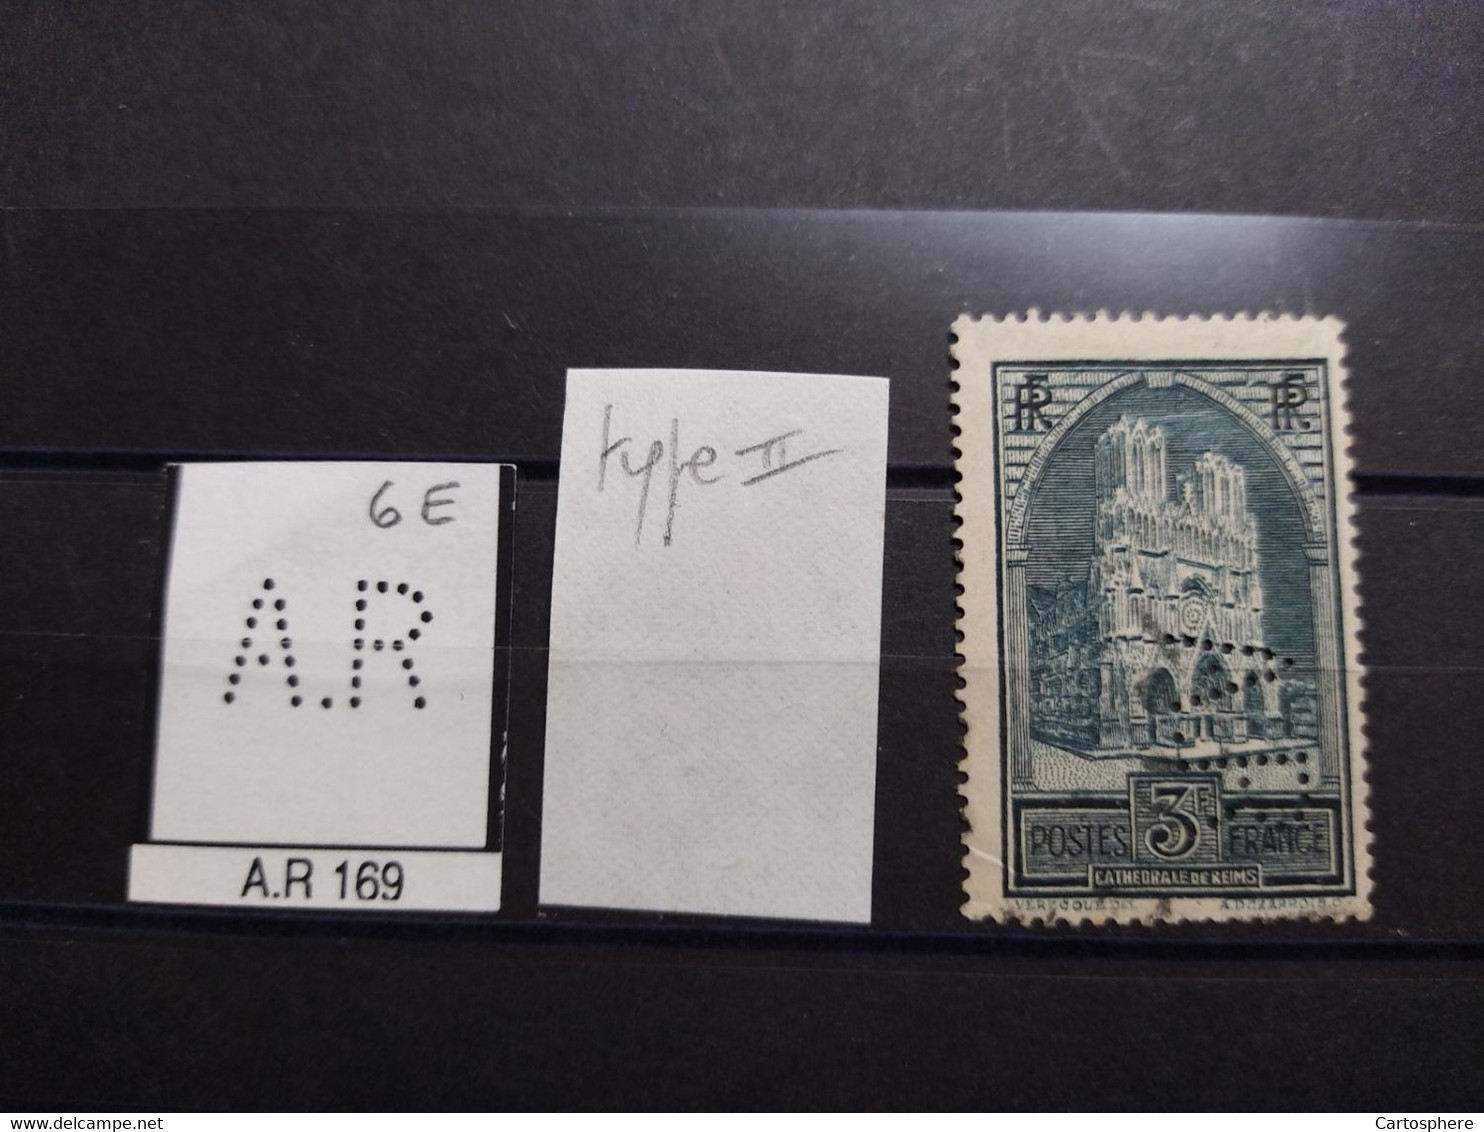 FRANCE AR 169 TIMBRE  A.R 169 SUR 259 TYPE II INDICE 6 PERFORE PERFORES PERFIN PERFINS PERFO PERFORATION PERFORIERT - Used Stamps